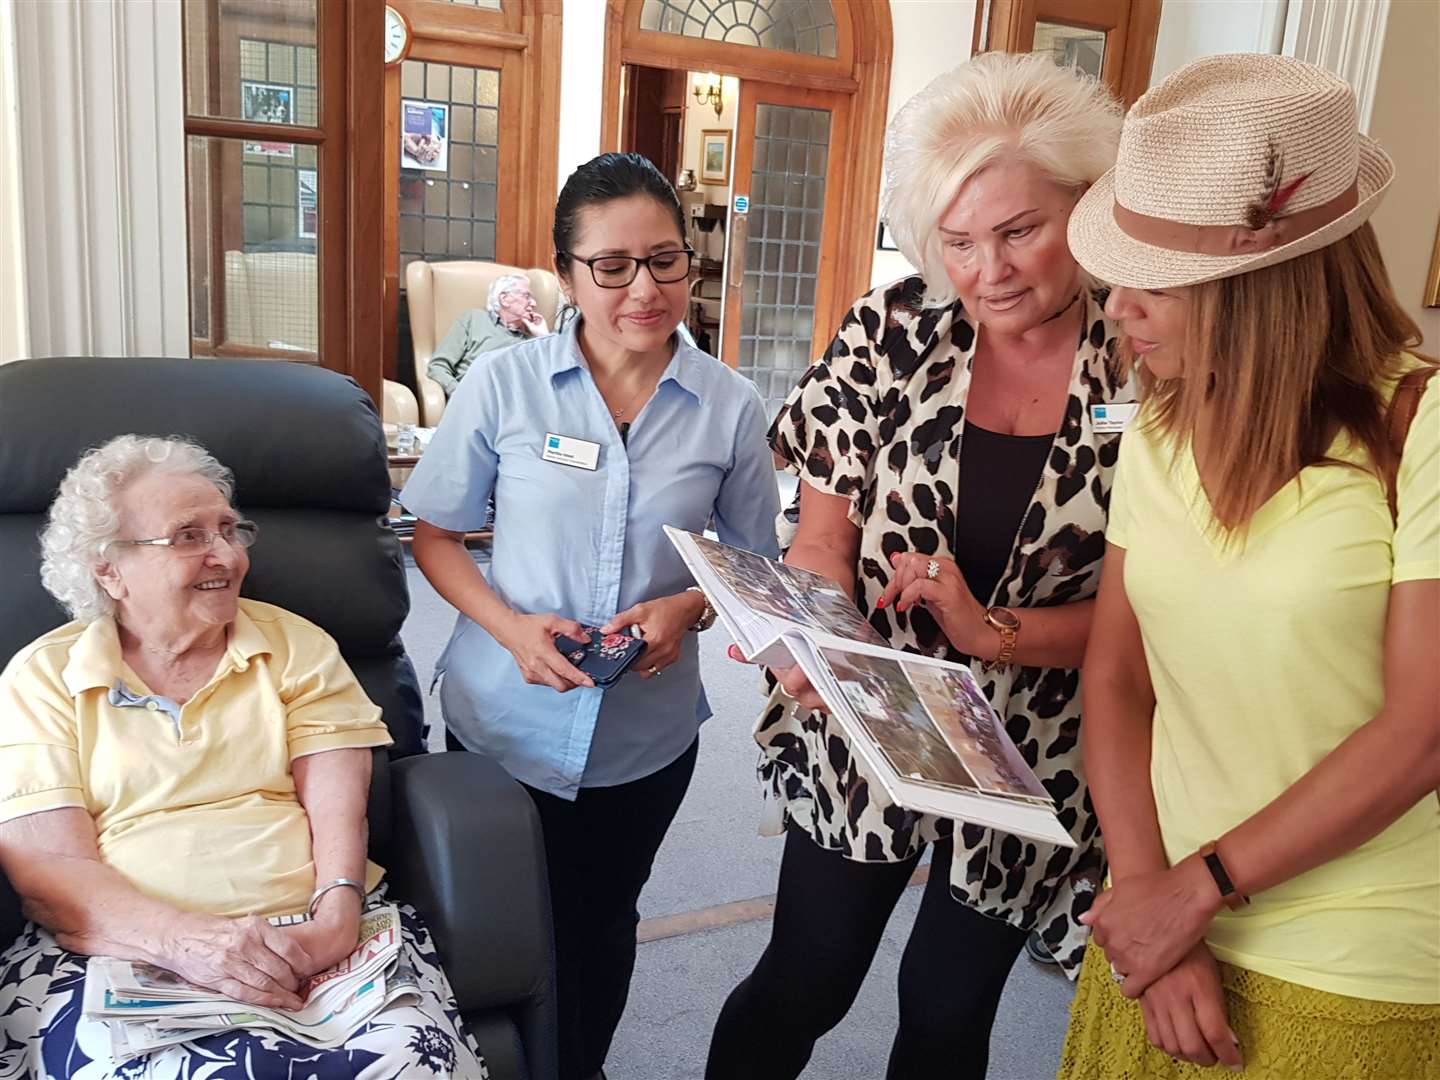 Residents during a previous visit by MP Helen Grant MP to the care home